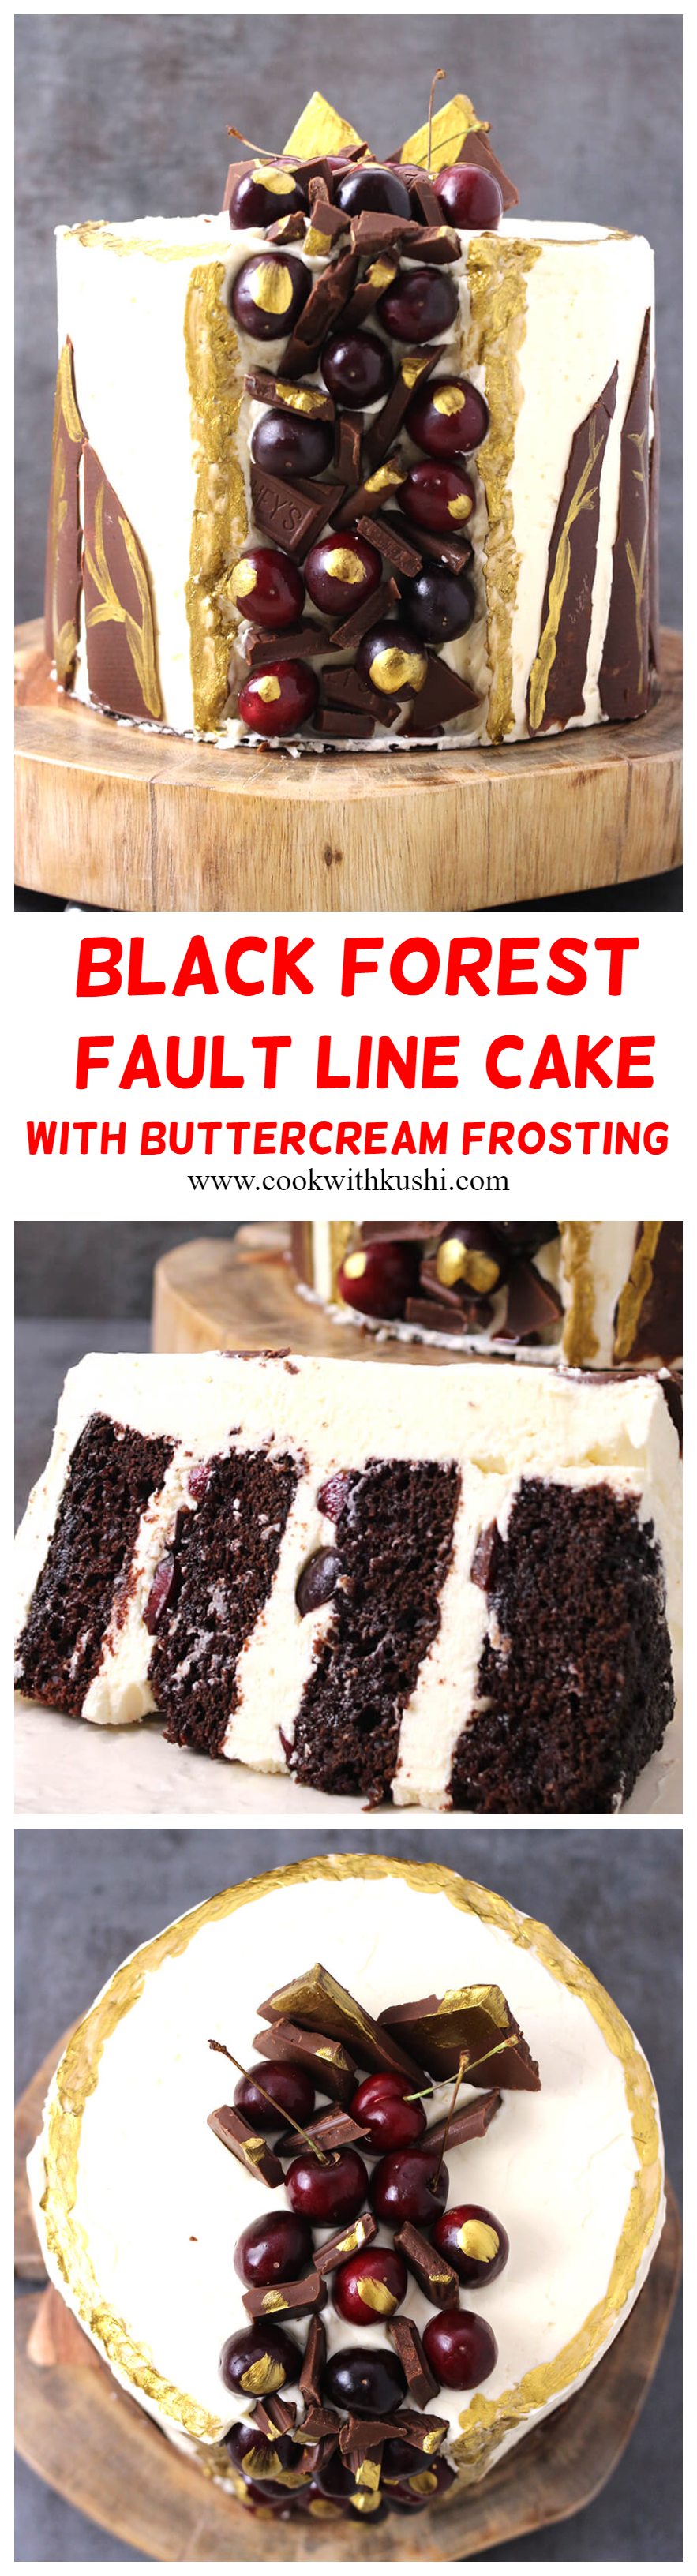 Black Forest Fault Line Cake With Buttercream Frosting is a rich and classic cake, where moist and delicious chocolate layers are combined with fresh cherries, and rich, silky smooth and melt in mouth frosting. #blackforestcake #faultlinecake #buttercreamfrosting #freshcherries #europeancake #germancake #bestchocolatecake